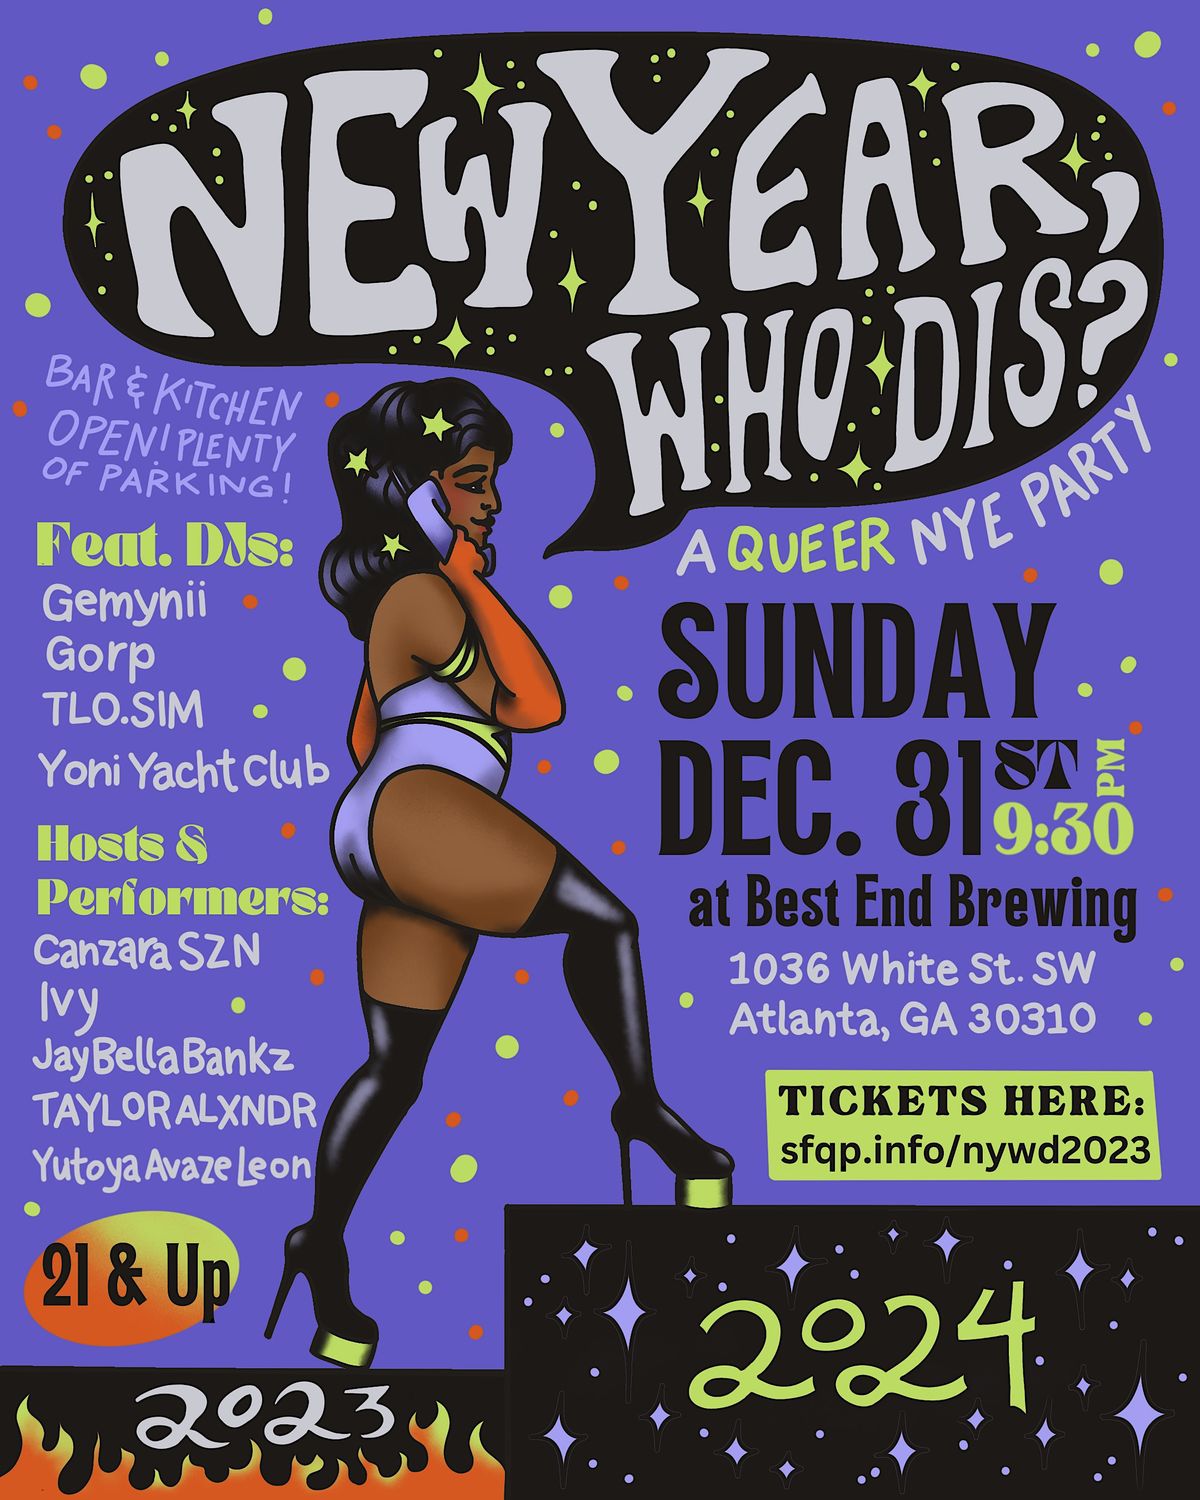 NEW YEAR, WHO DIS? A Queer NYE Party